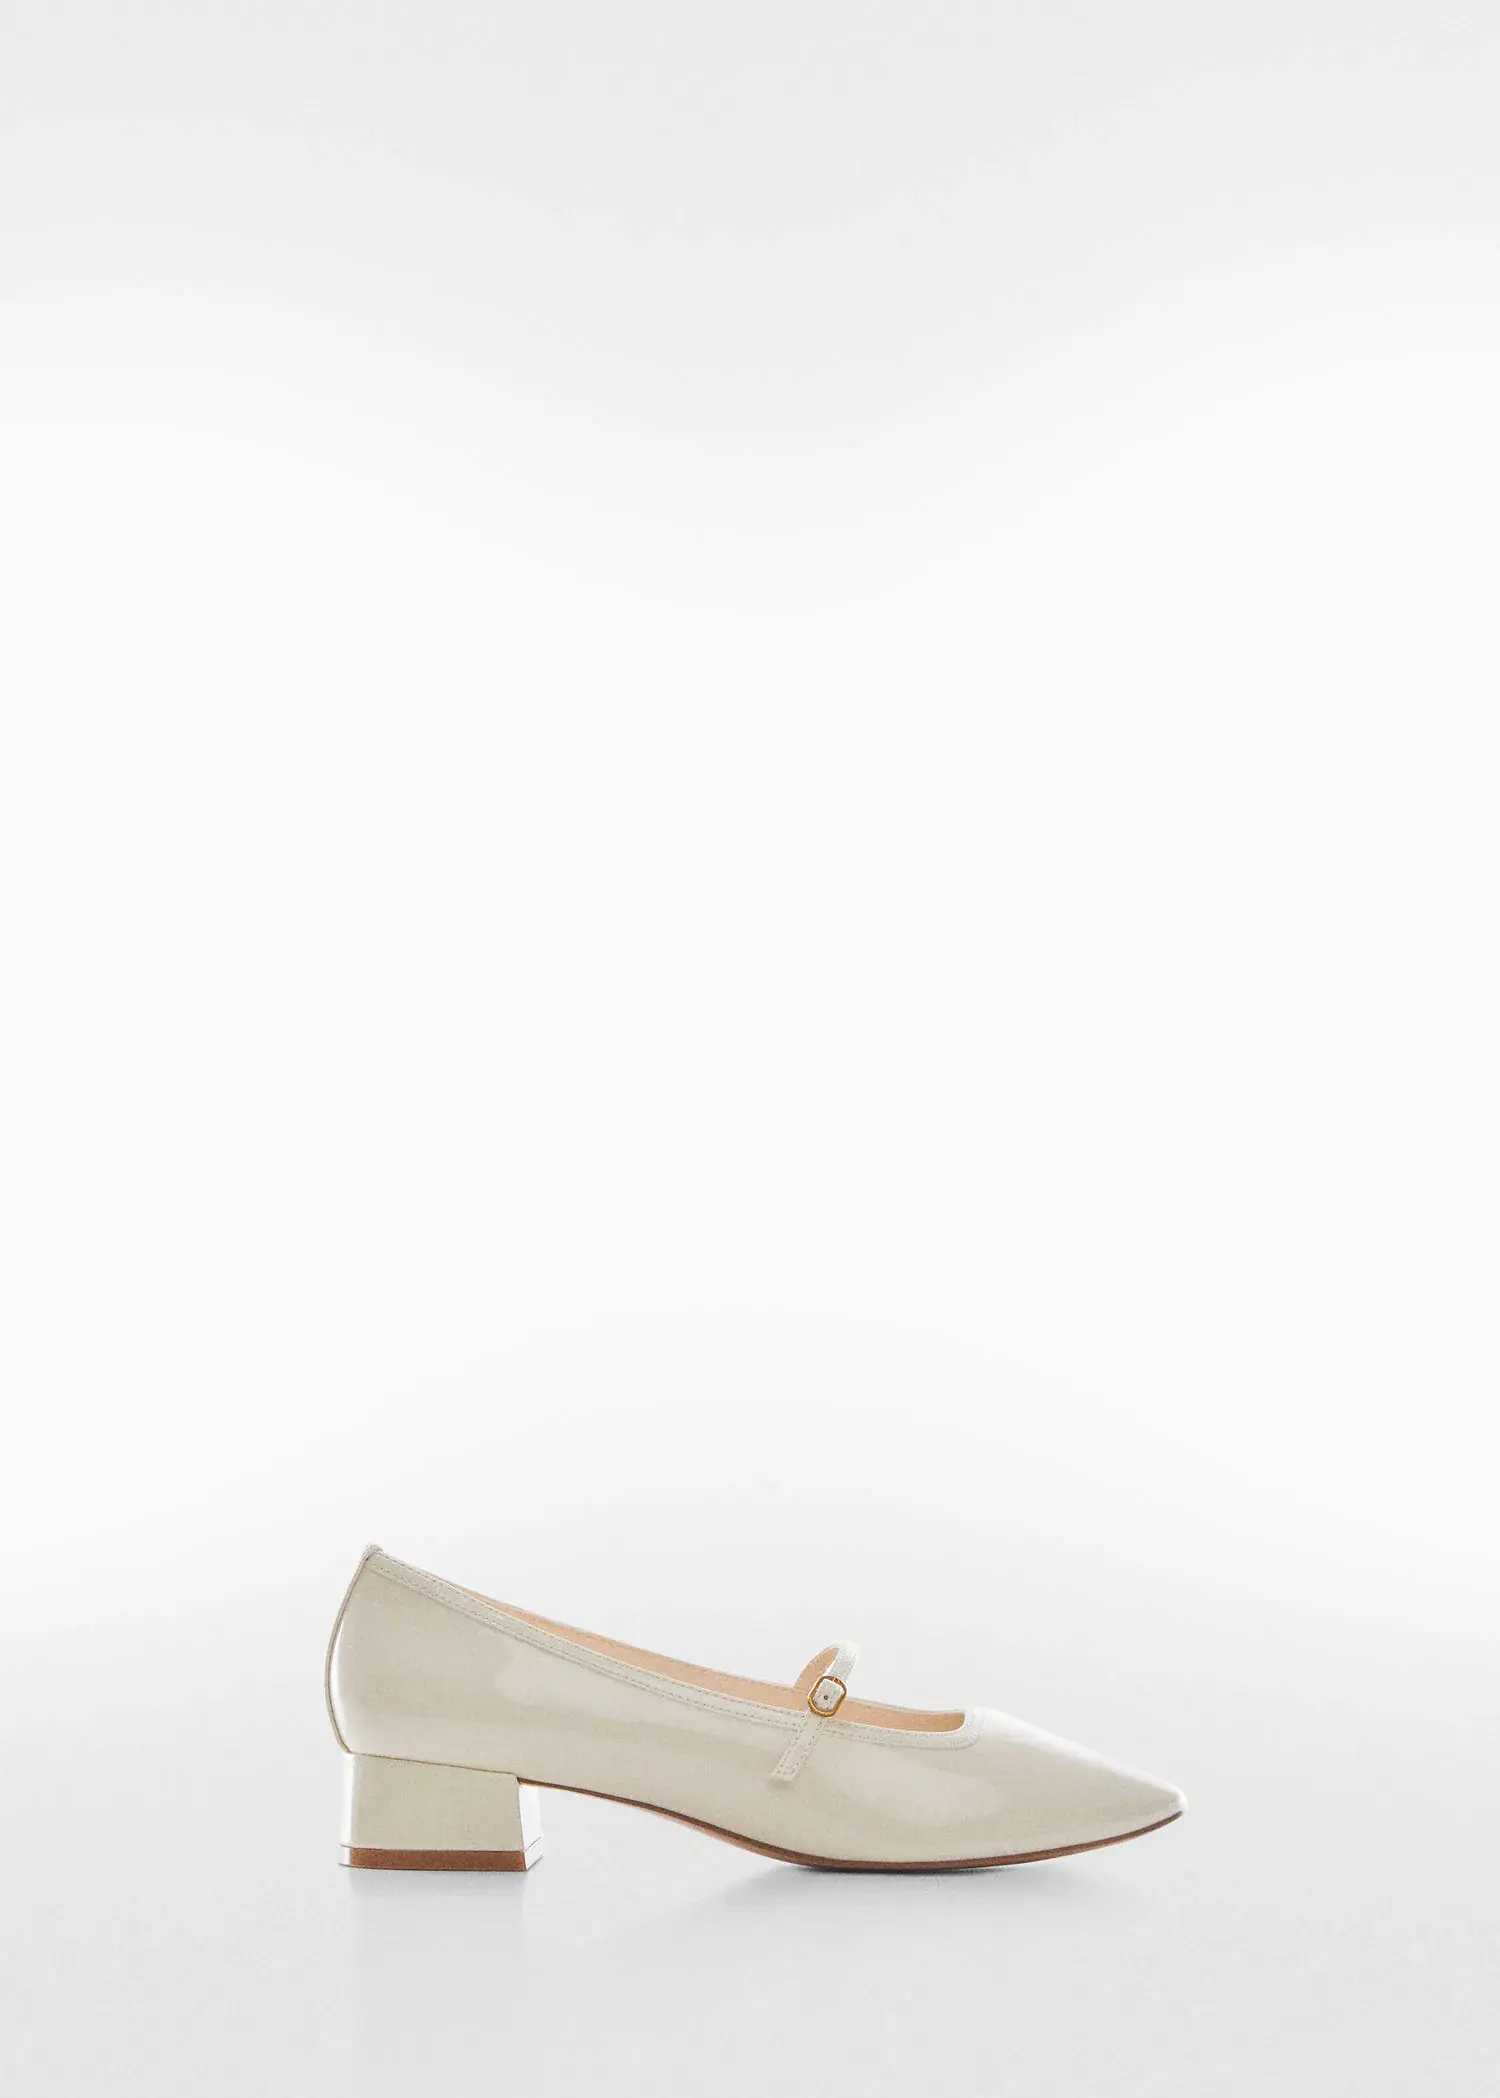 Mango Buckle heel shoes. a pair of white shoes on a white background. 